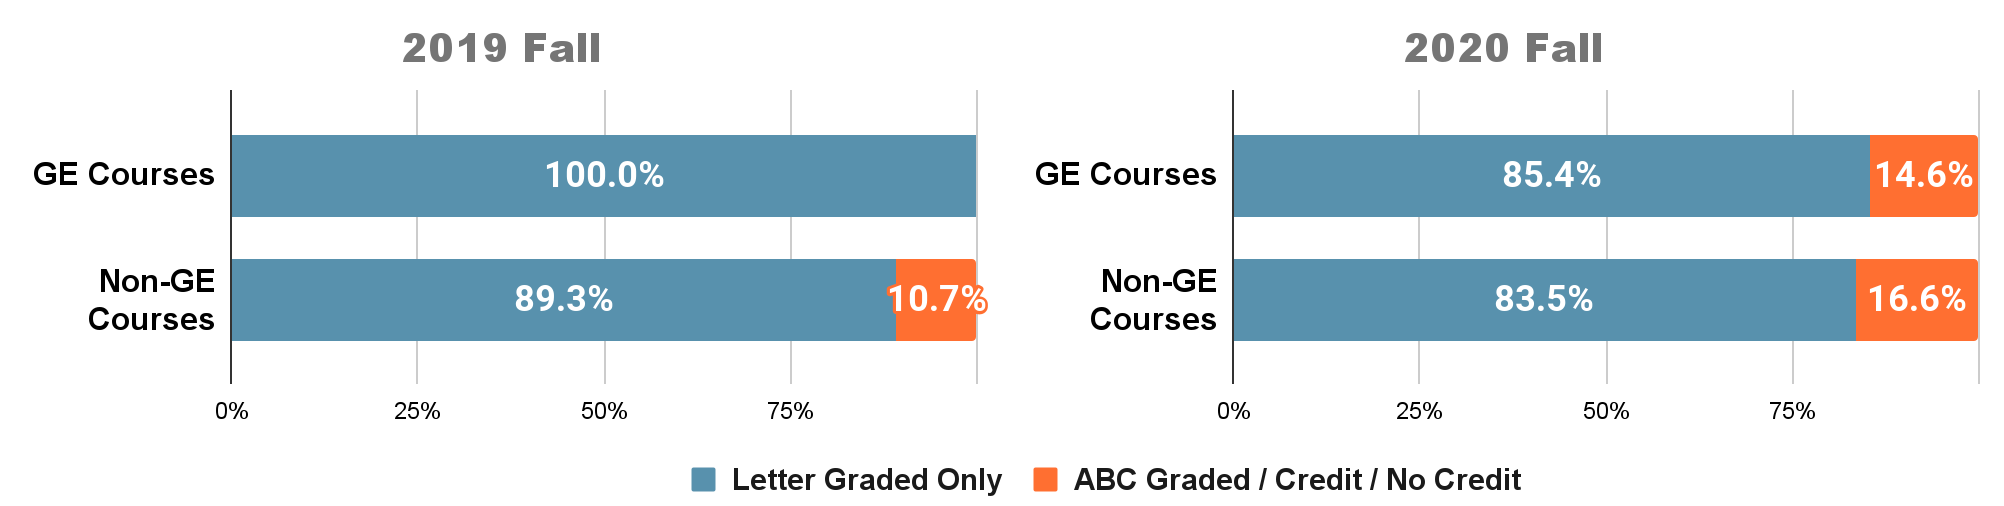 Comparison of Grade Bases Selections 2019 Fall to 2020 Fall: Degree-Seeking Undergraduates by General Education (GE) and Non-GE Courses. See Accessible Data Table below.